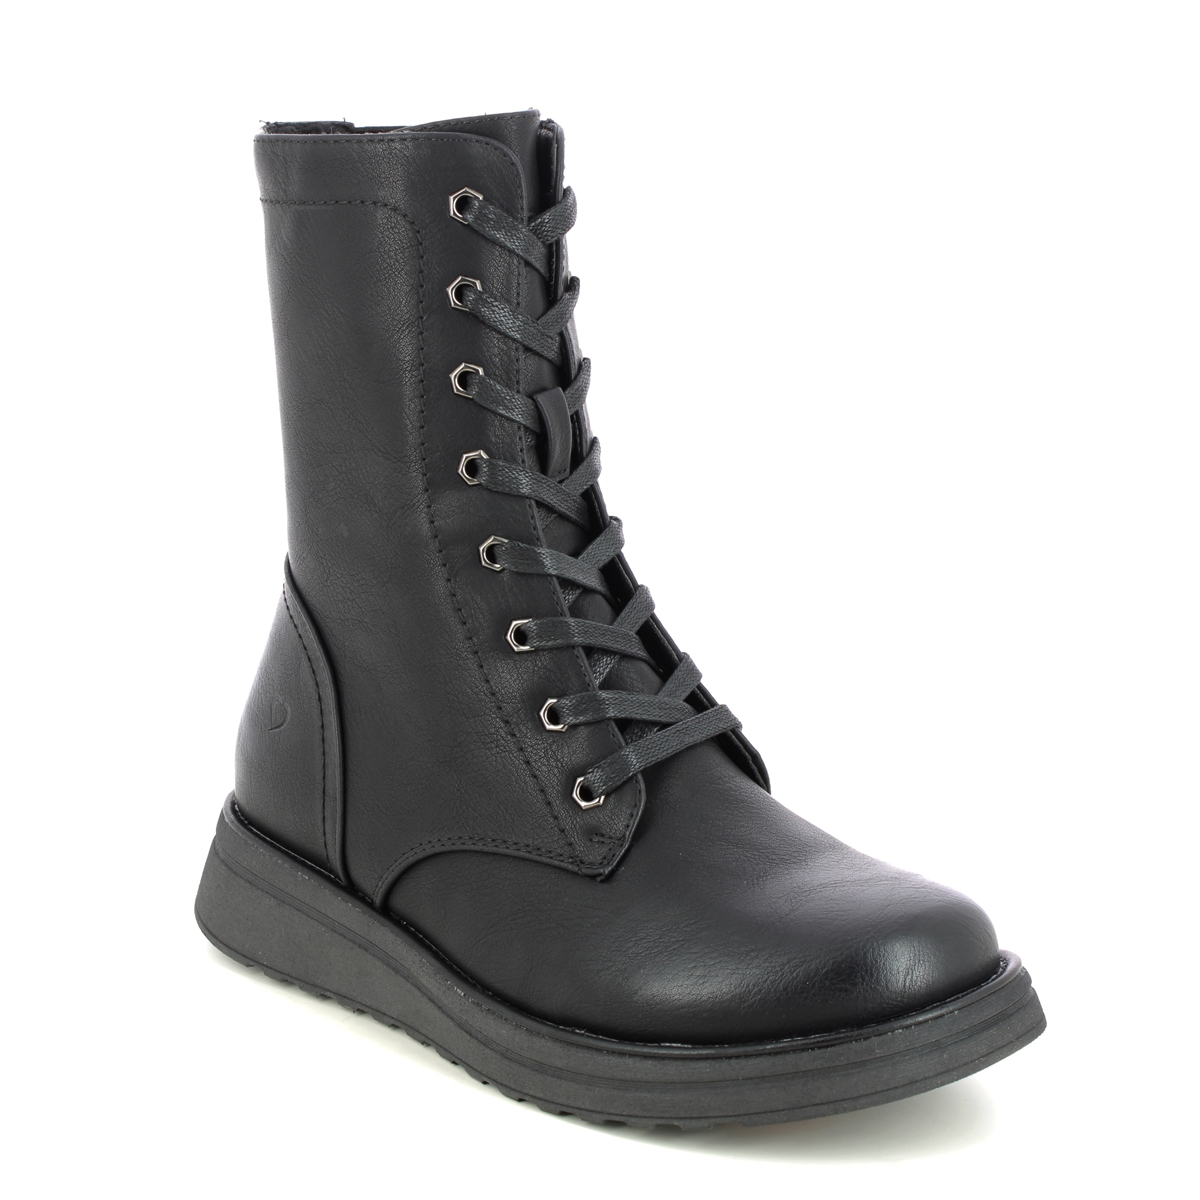 Heavenly Feet Martina Walker Black Womens Lace Up Boots 3509-34 in a Plain Man-made in Size 5